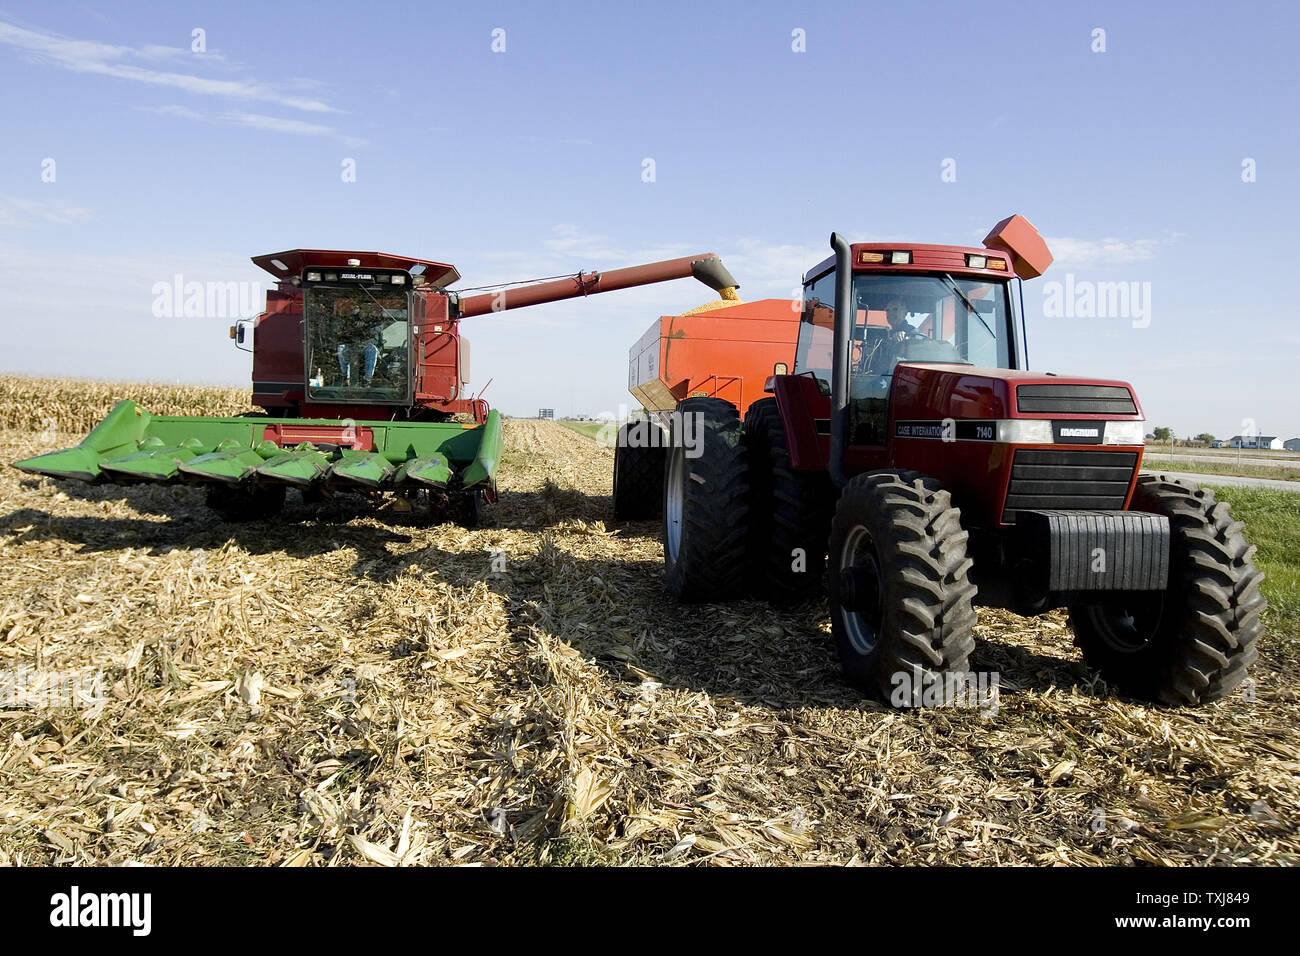 Brad Weber (L) harvests corn with his father Gary (R) on land he rents near Manteno, Illinois on October 20, 2008. Weber farms 450 acres part-time but hopes to acquire more land so that he can be a full-time farmer. Corn for December delivery rose $0.155 per bushel at the Chicago Board of Trade closing at $4.185 Monday as rebounding oil markets shift investor focus to commodities. (UPI Photo/Brian Kersey) Stock Photo